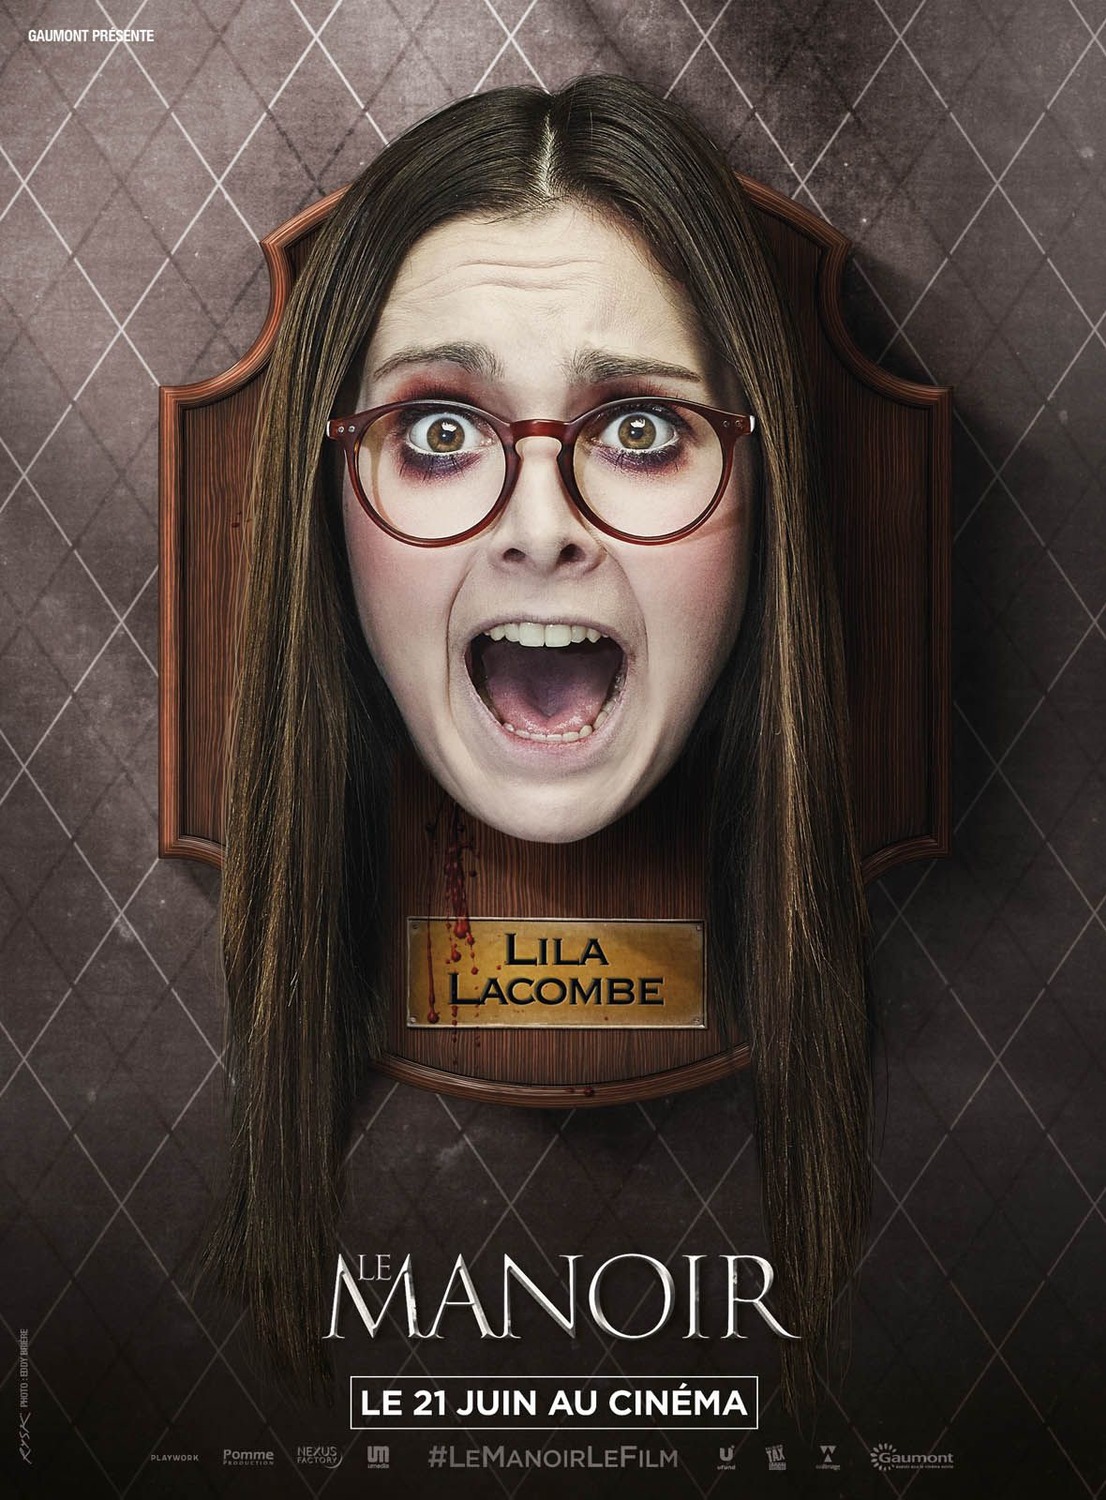 Extra Large Movie Poster Image for Le manoir (#4 of 11)